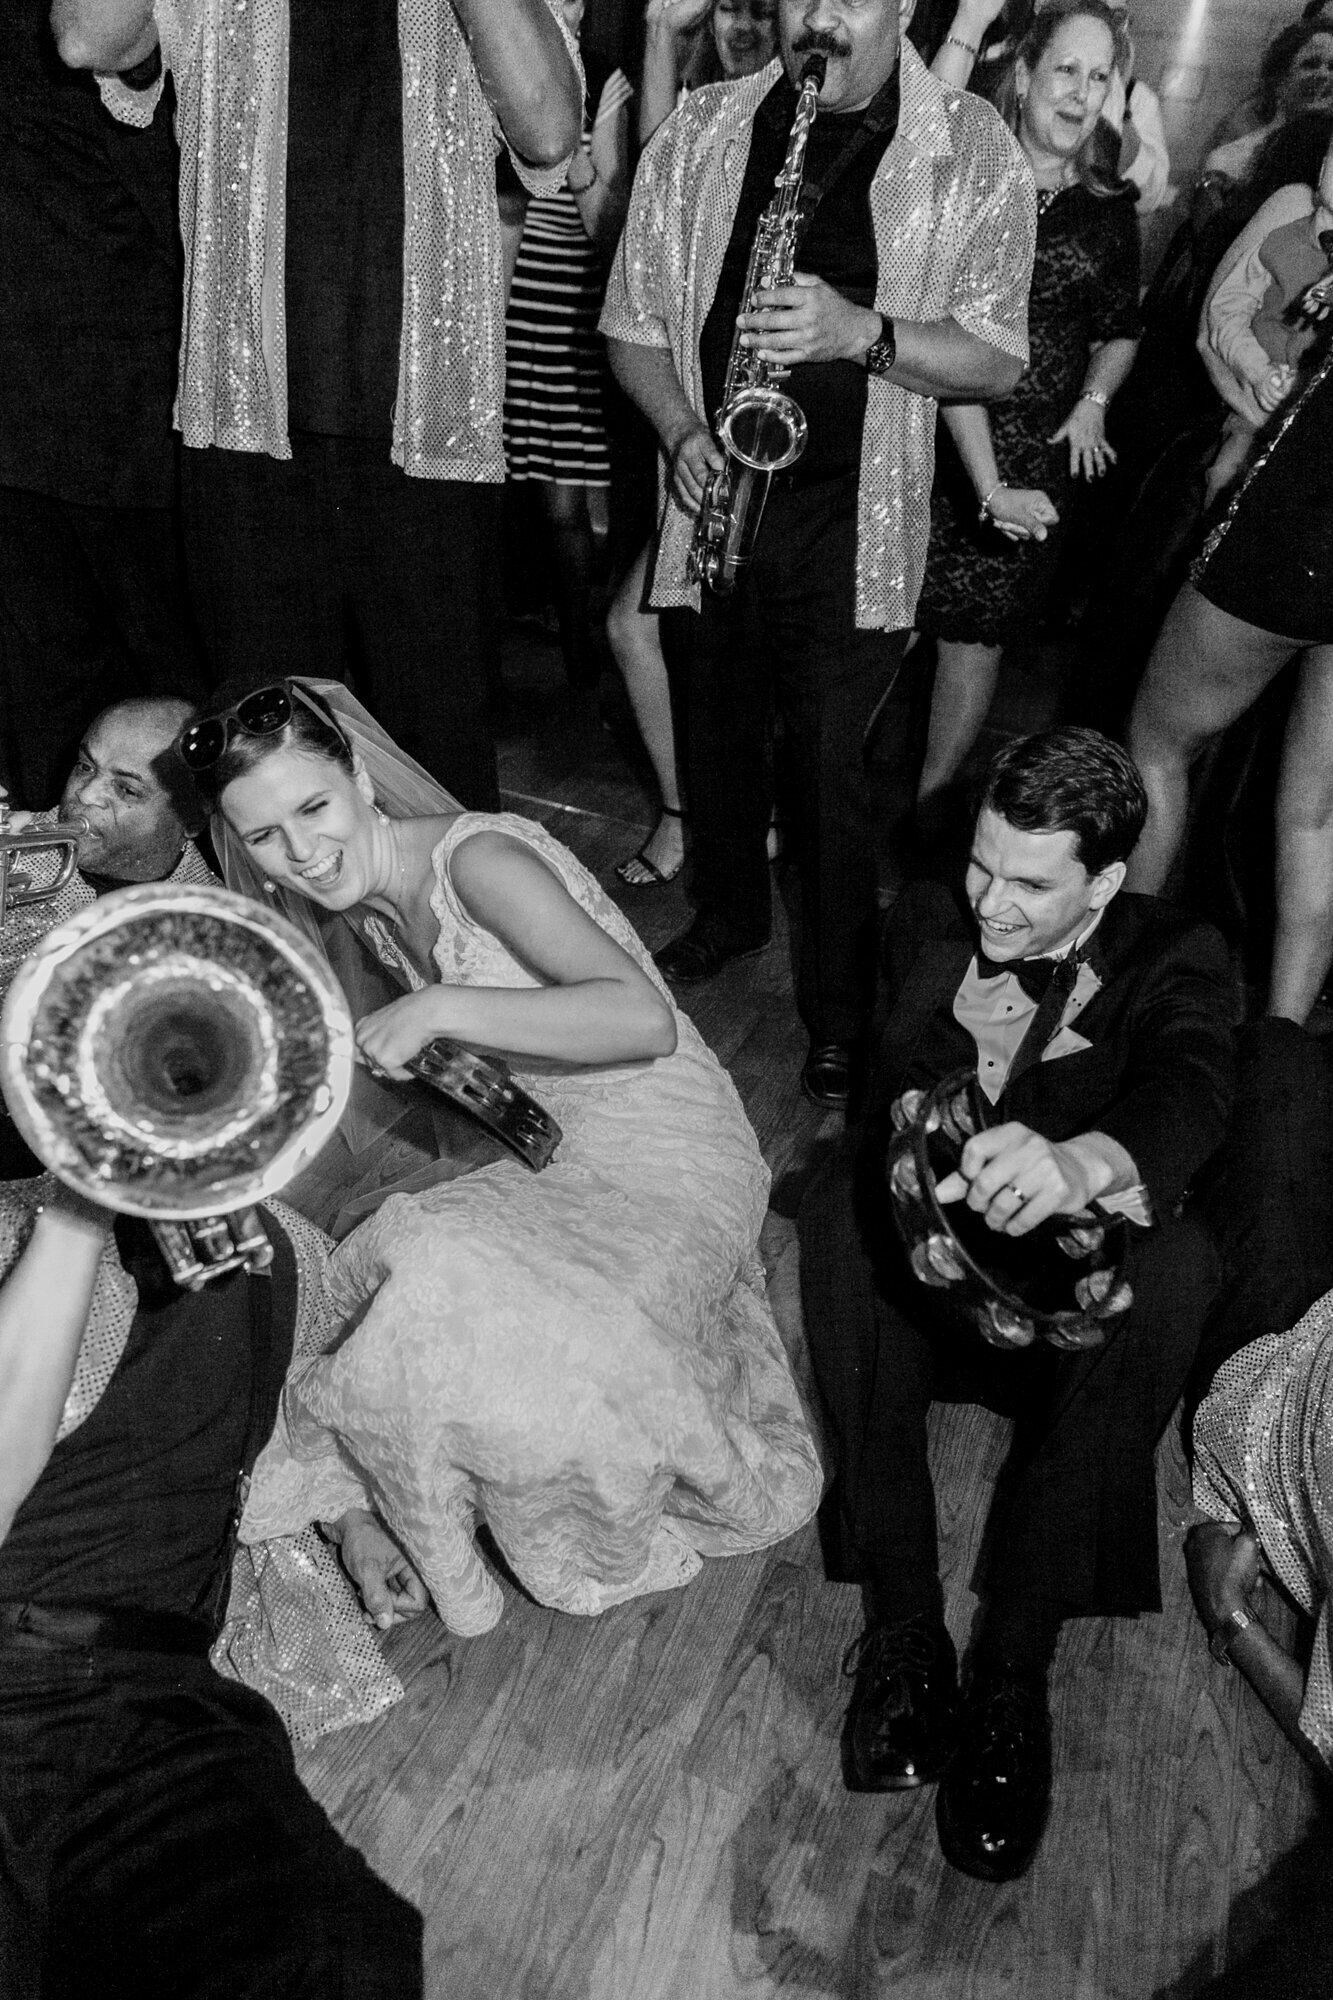 Bride and groom on the dance floor with their band